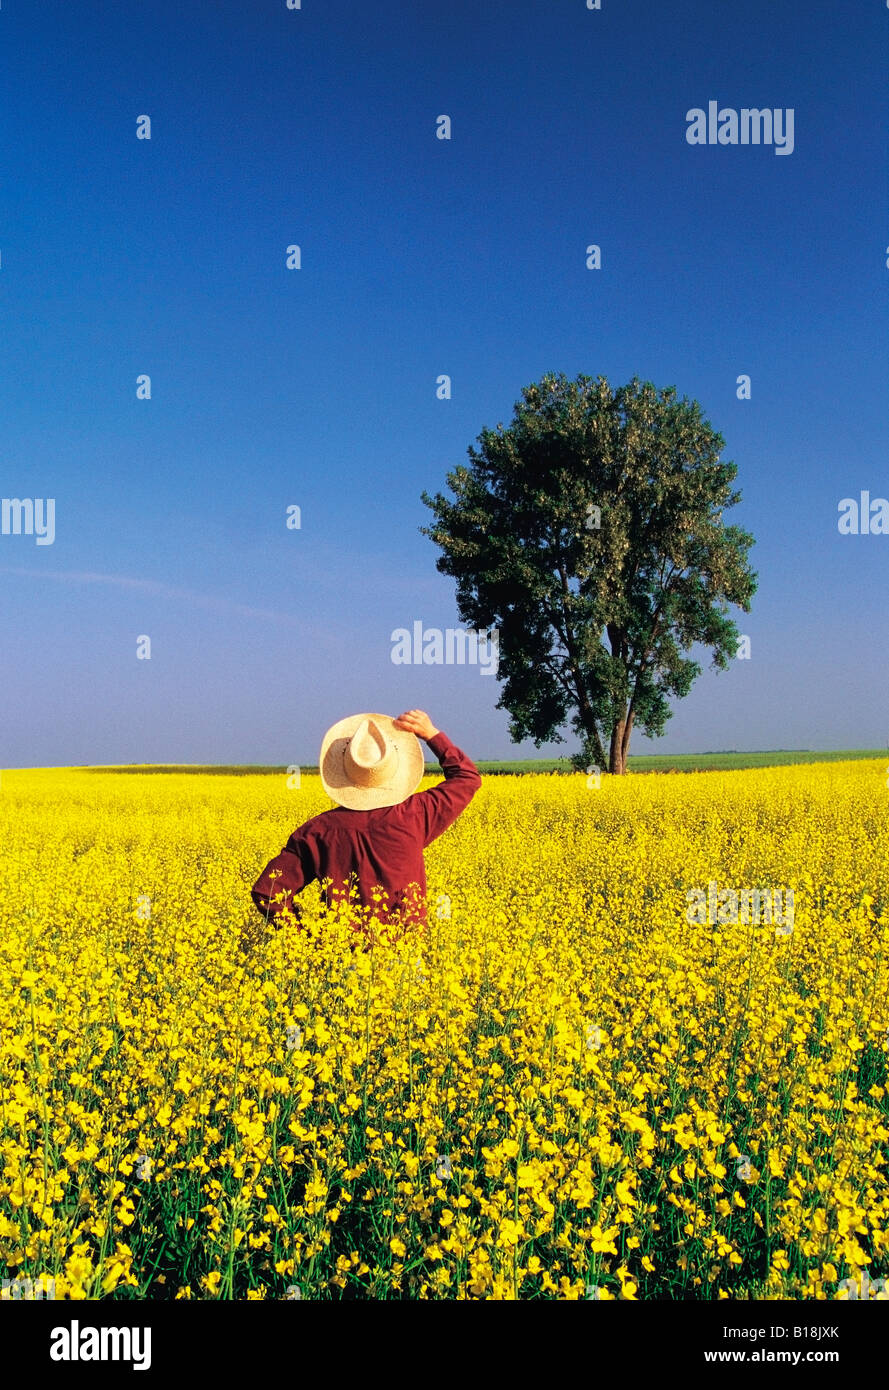 man in blooming canola field with cottonwood tree in background, Manitoba, Canada Stock Photo